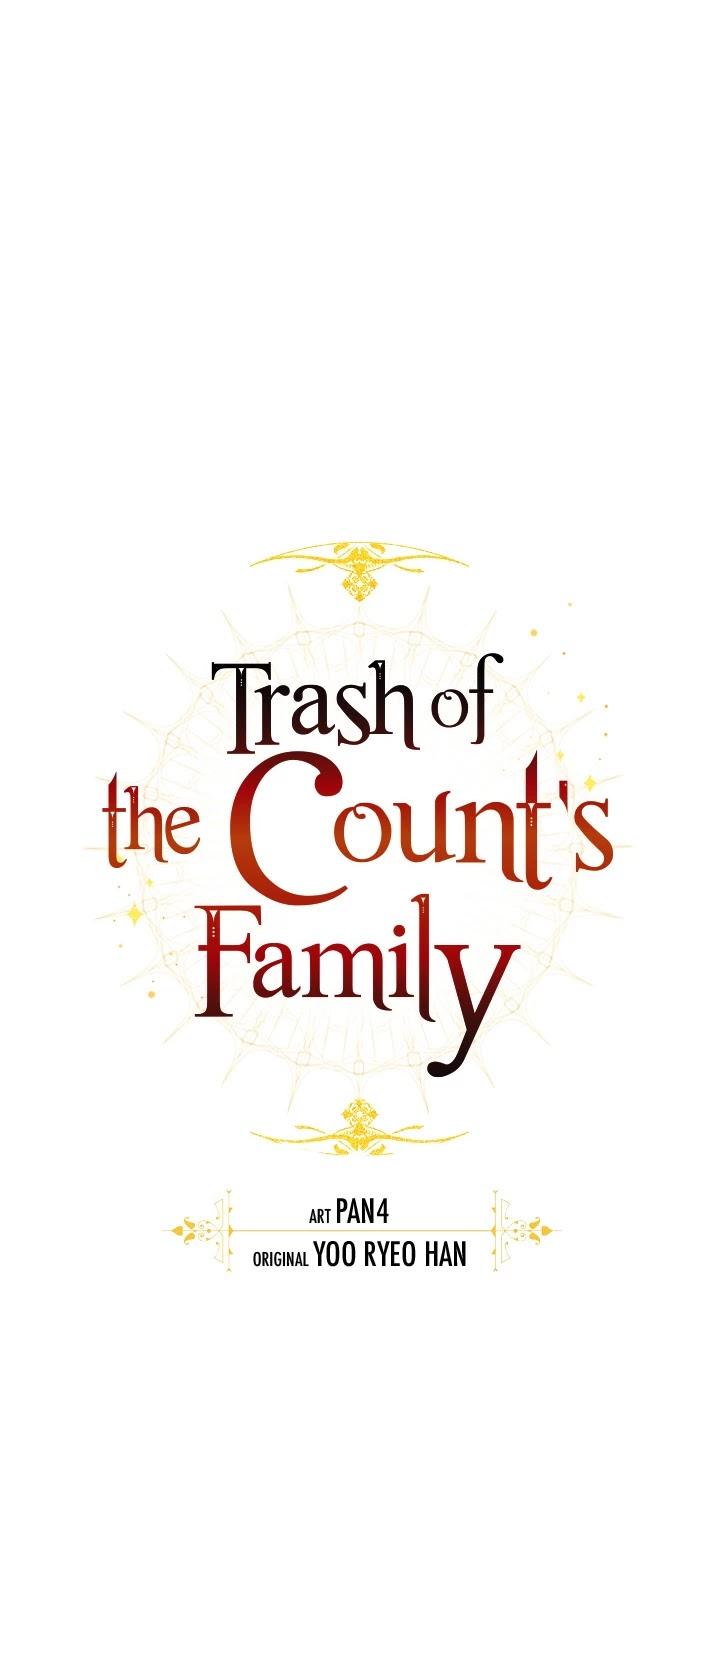 Trash of the Count